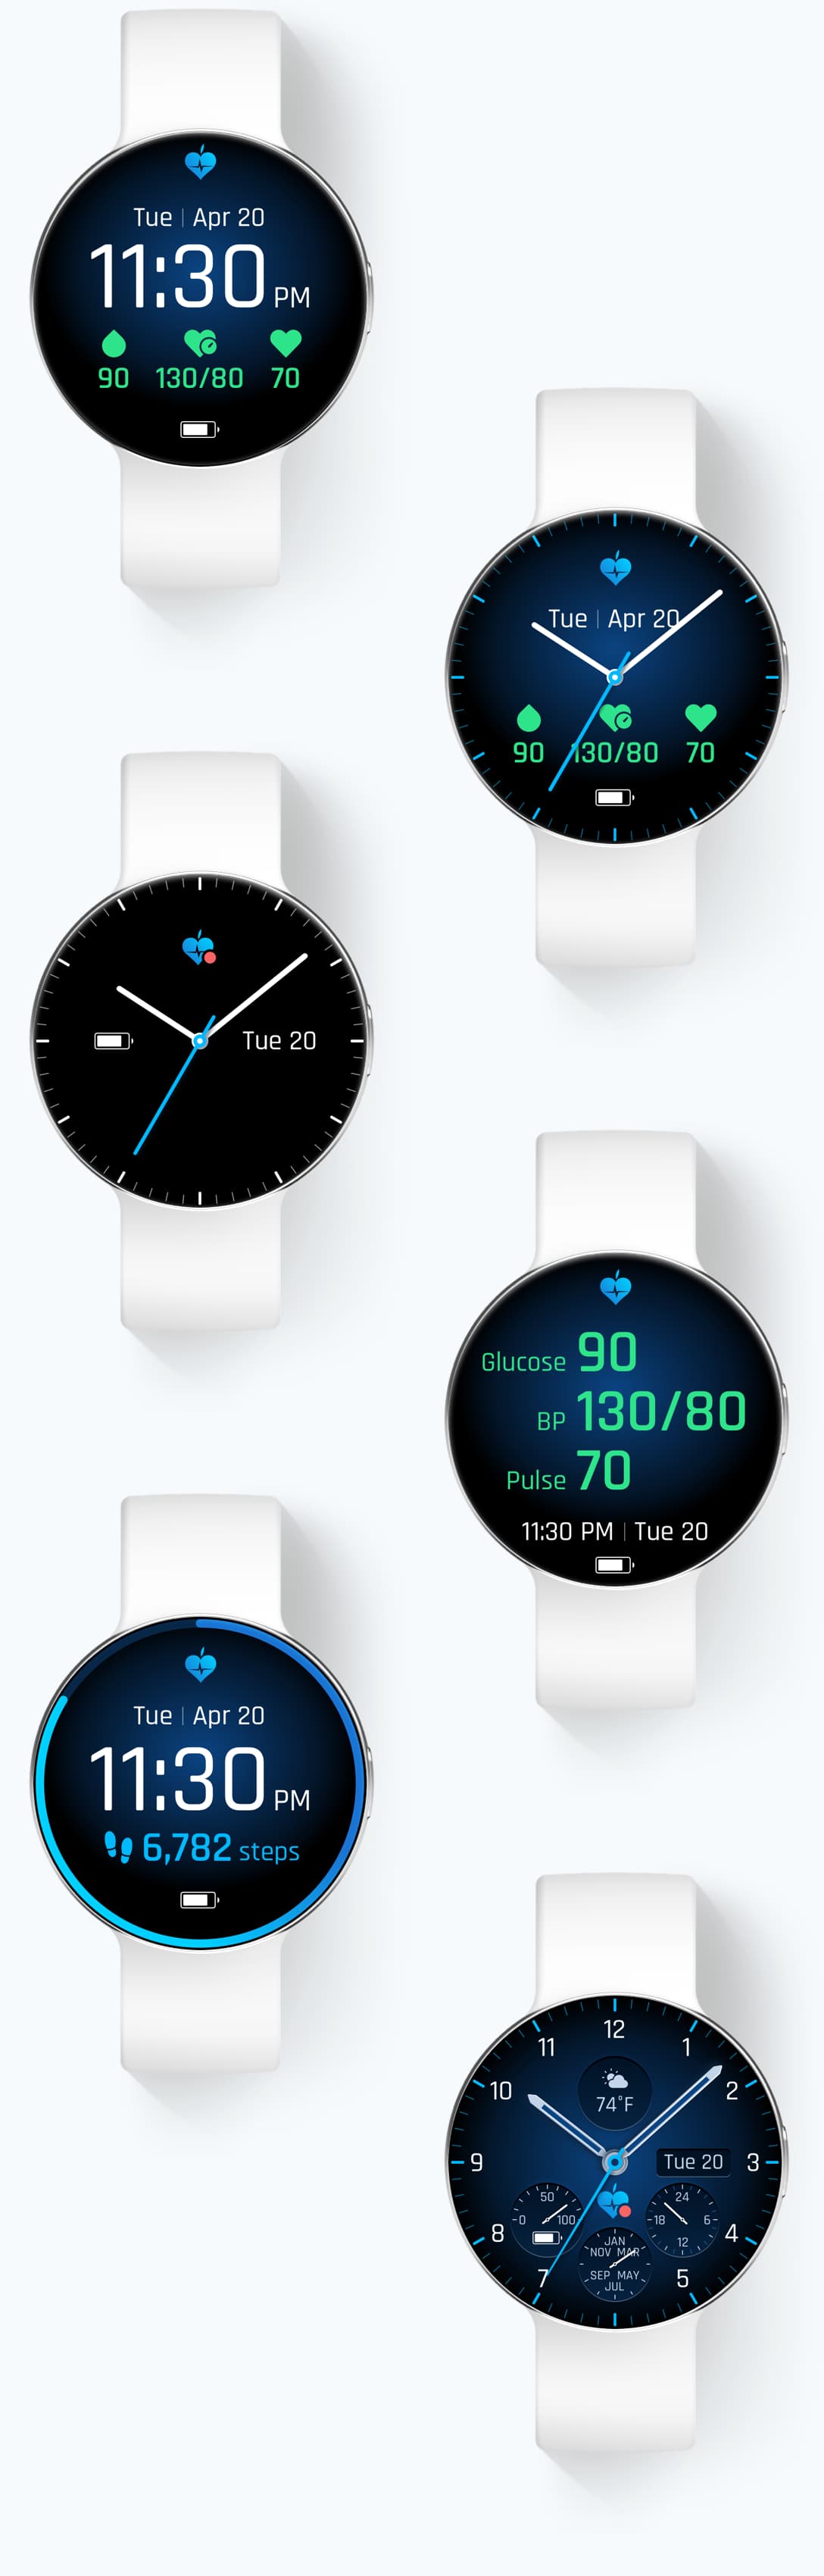 Renderings showing various custom watch faces a user can create and customize